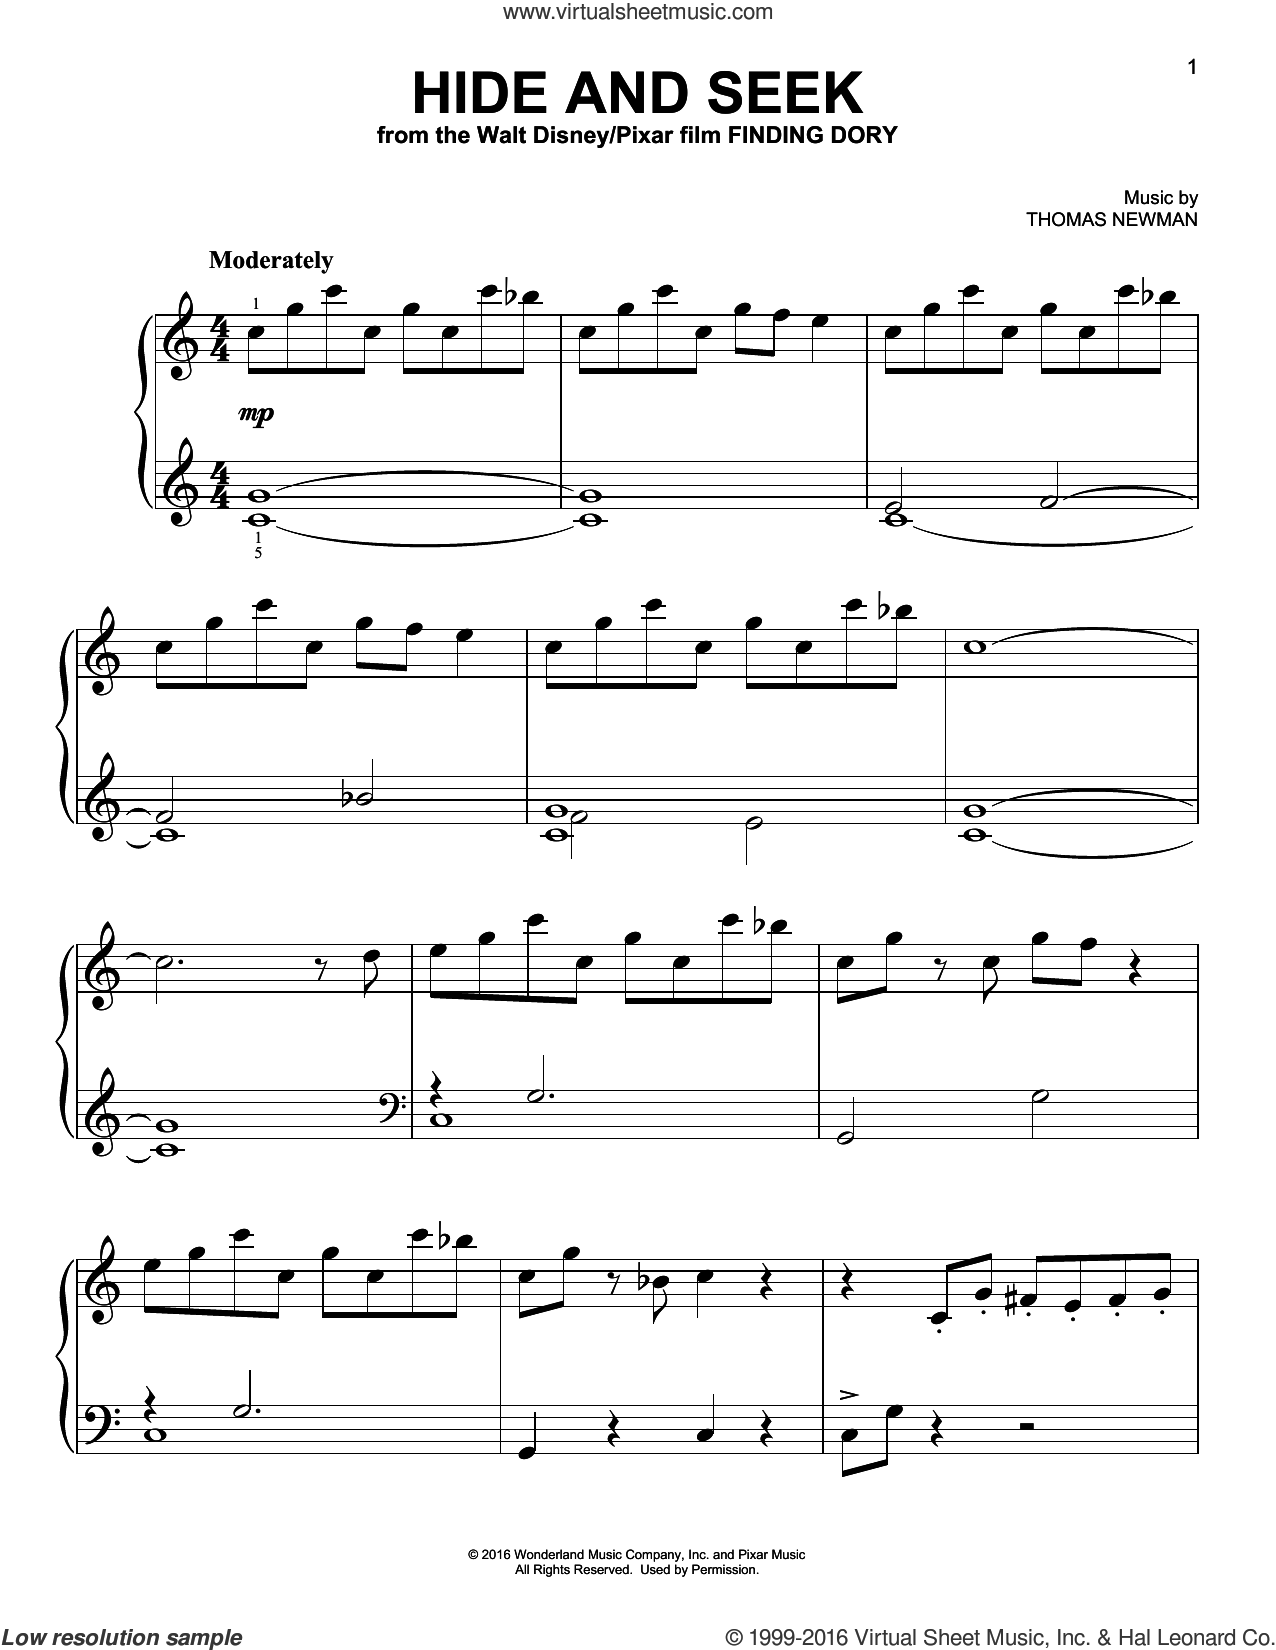 Hide And Seek (from Finding Dory) sheet music for piano solo